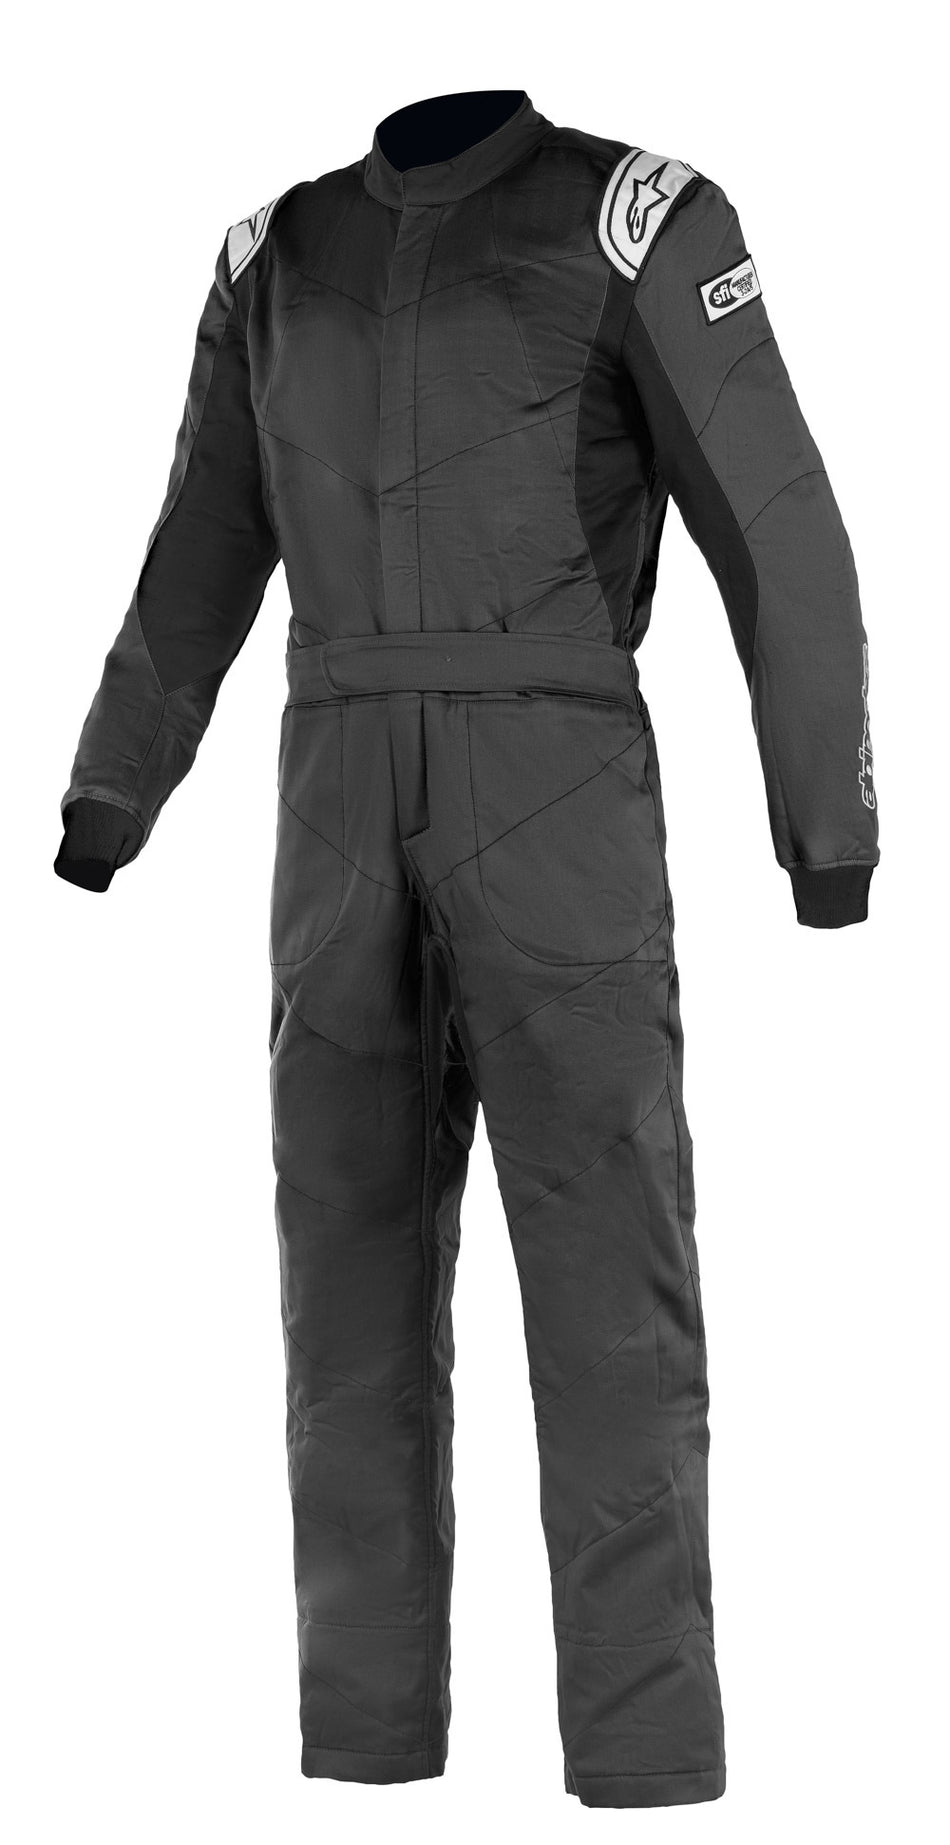 Driving Suit - Knoxville V2 - 1-Piece - SFI 3.2A/5 - Boot-Cut - Triple Layer - Fire Retardant Fabric - Black - Size 46 - X-Small / Small - Each